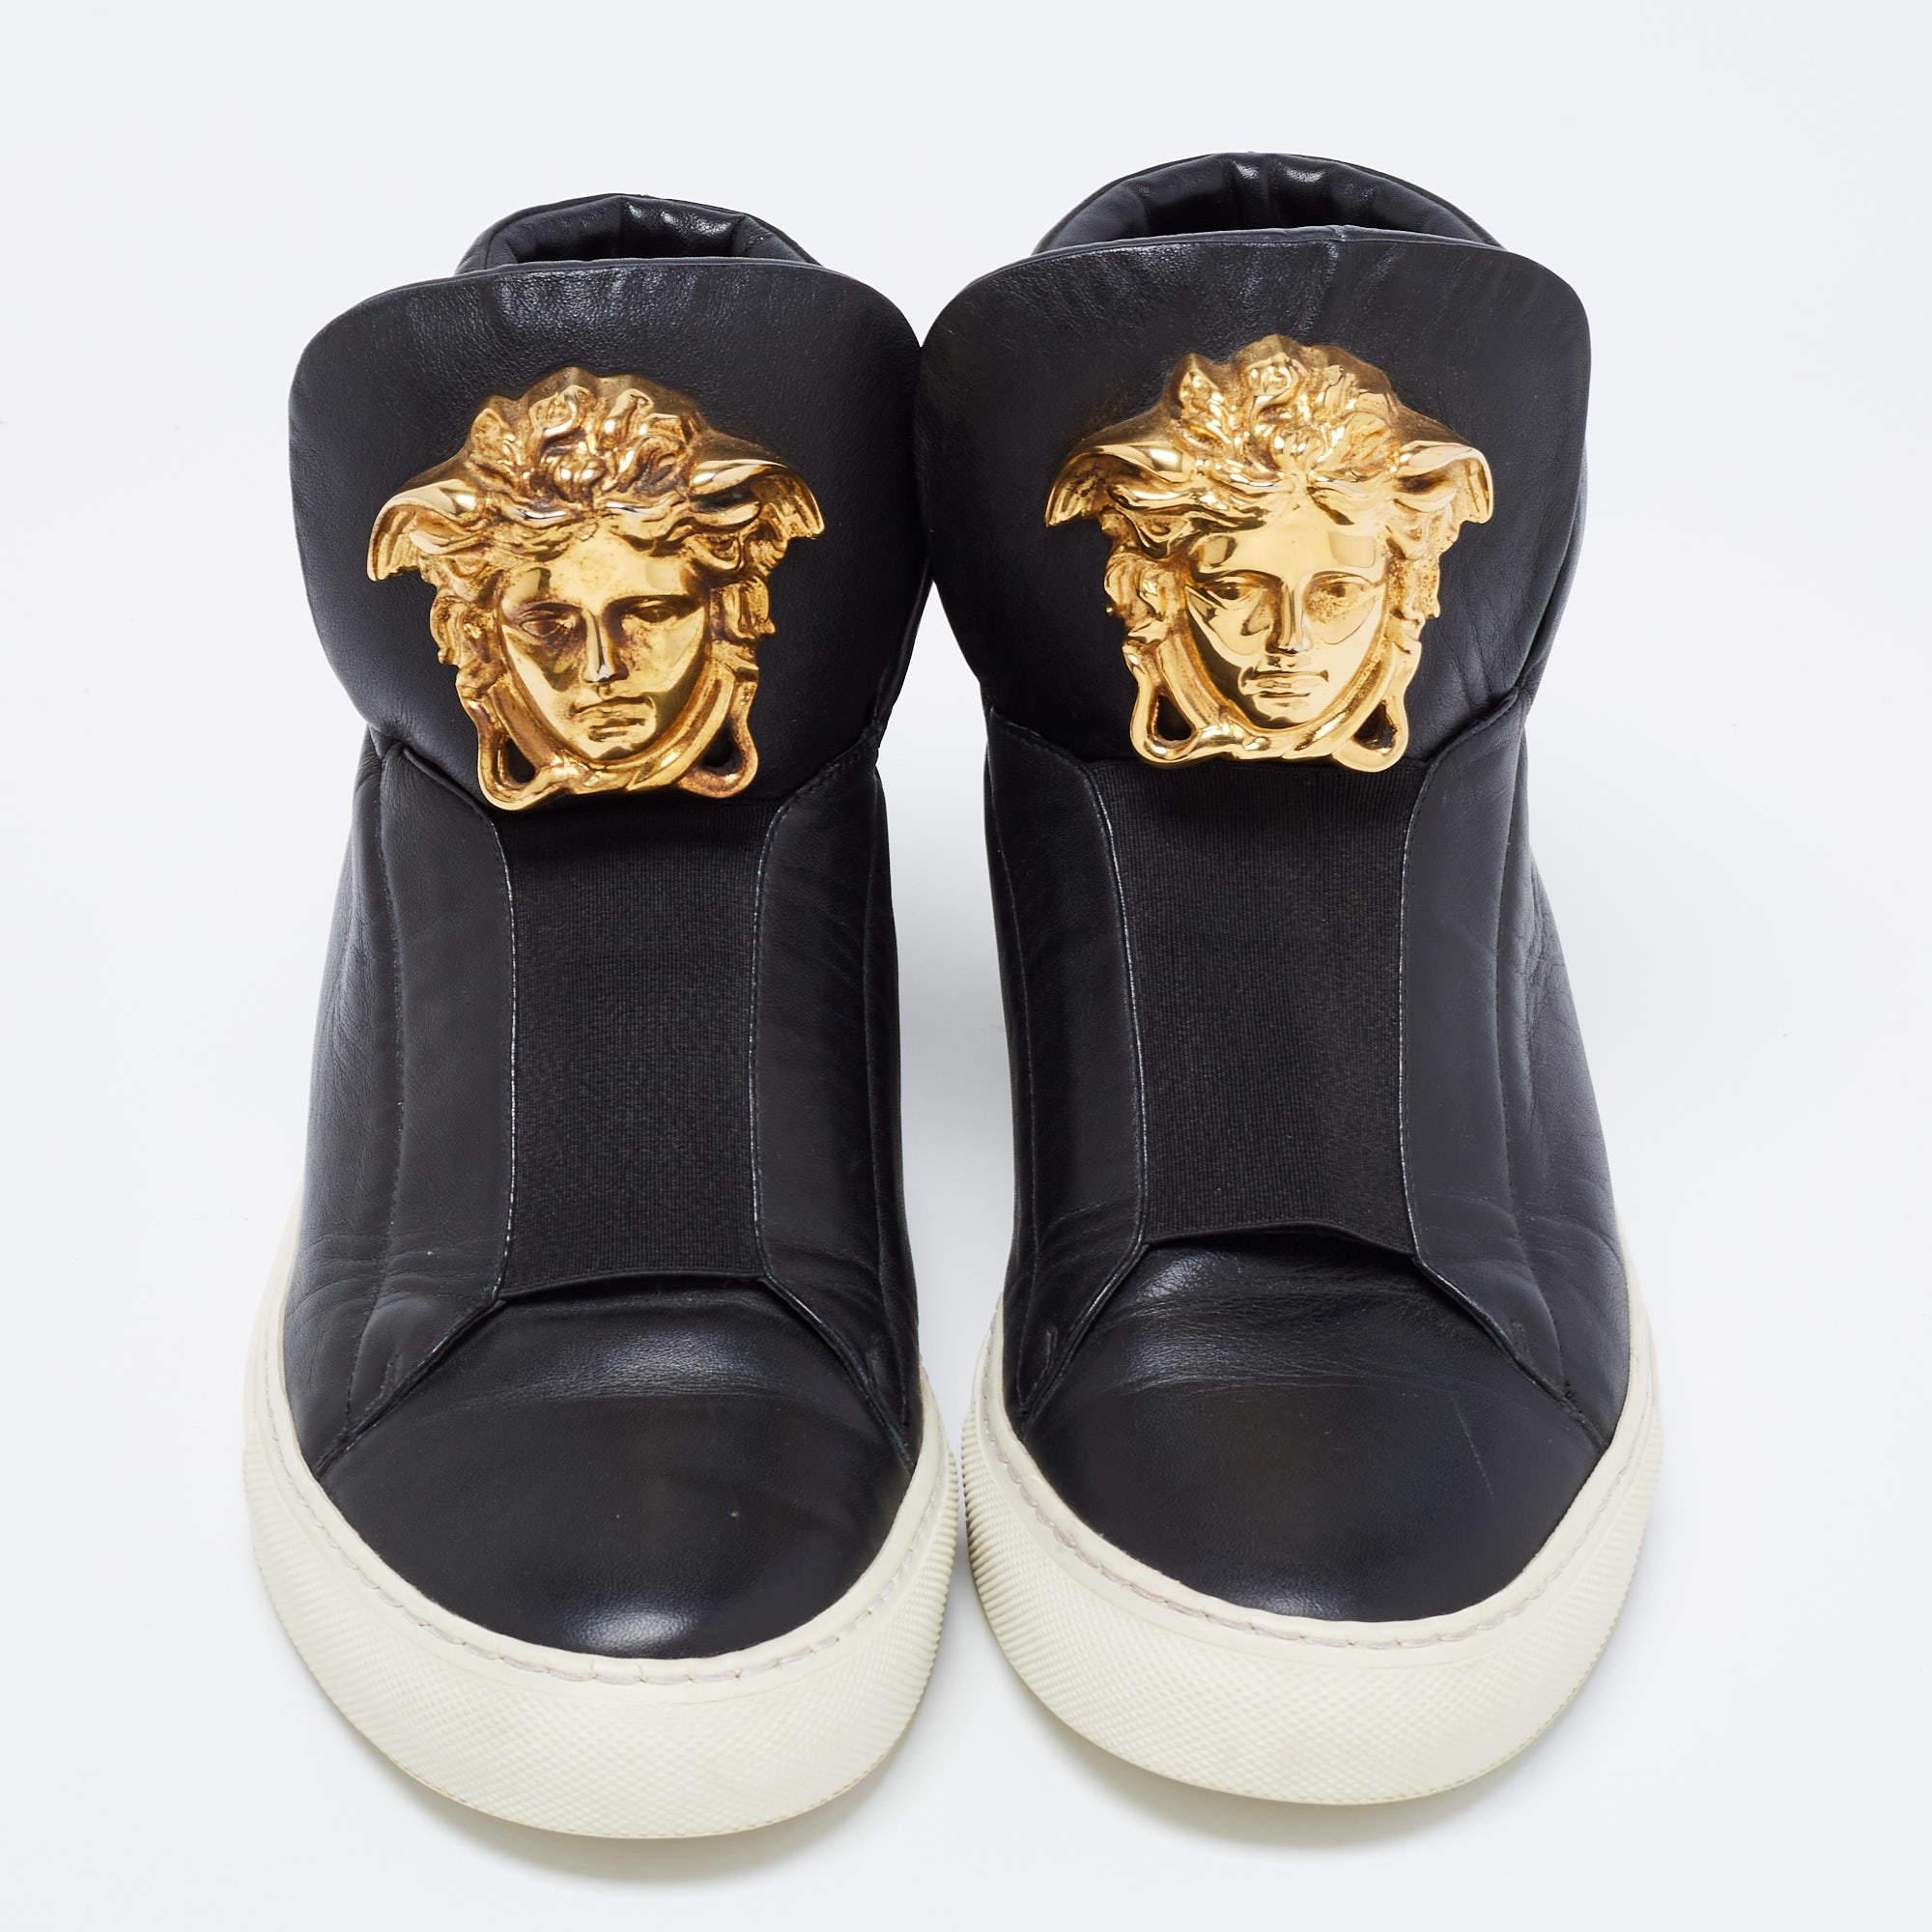 Versace Palazzo Sneakers - 6 For Sale on 1stDibs | versace palazzo shoes,  versace palazzo high top sneakers, versace palazzo sneakers white